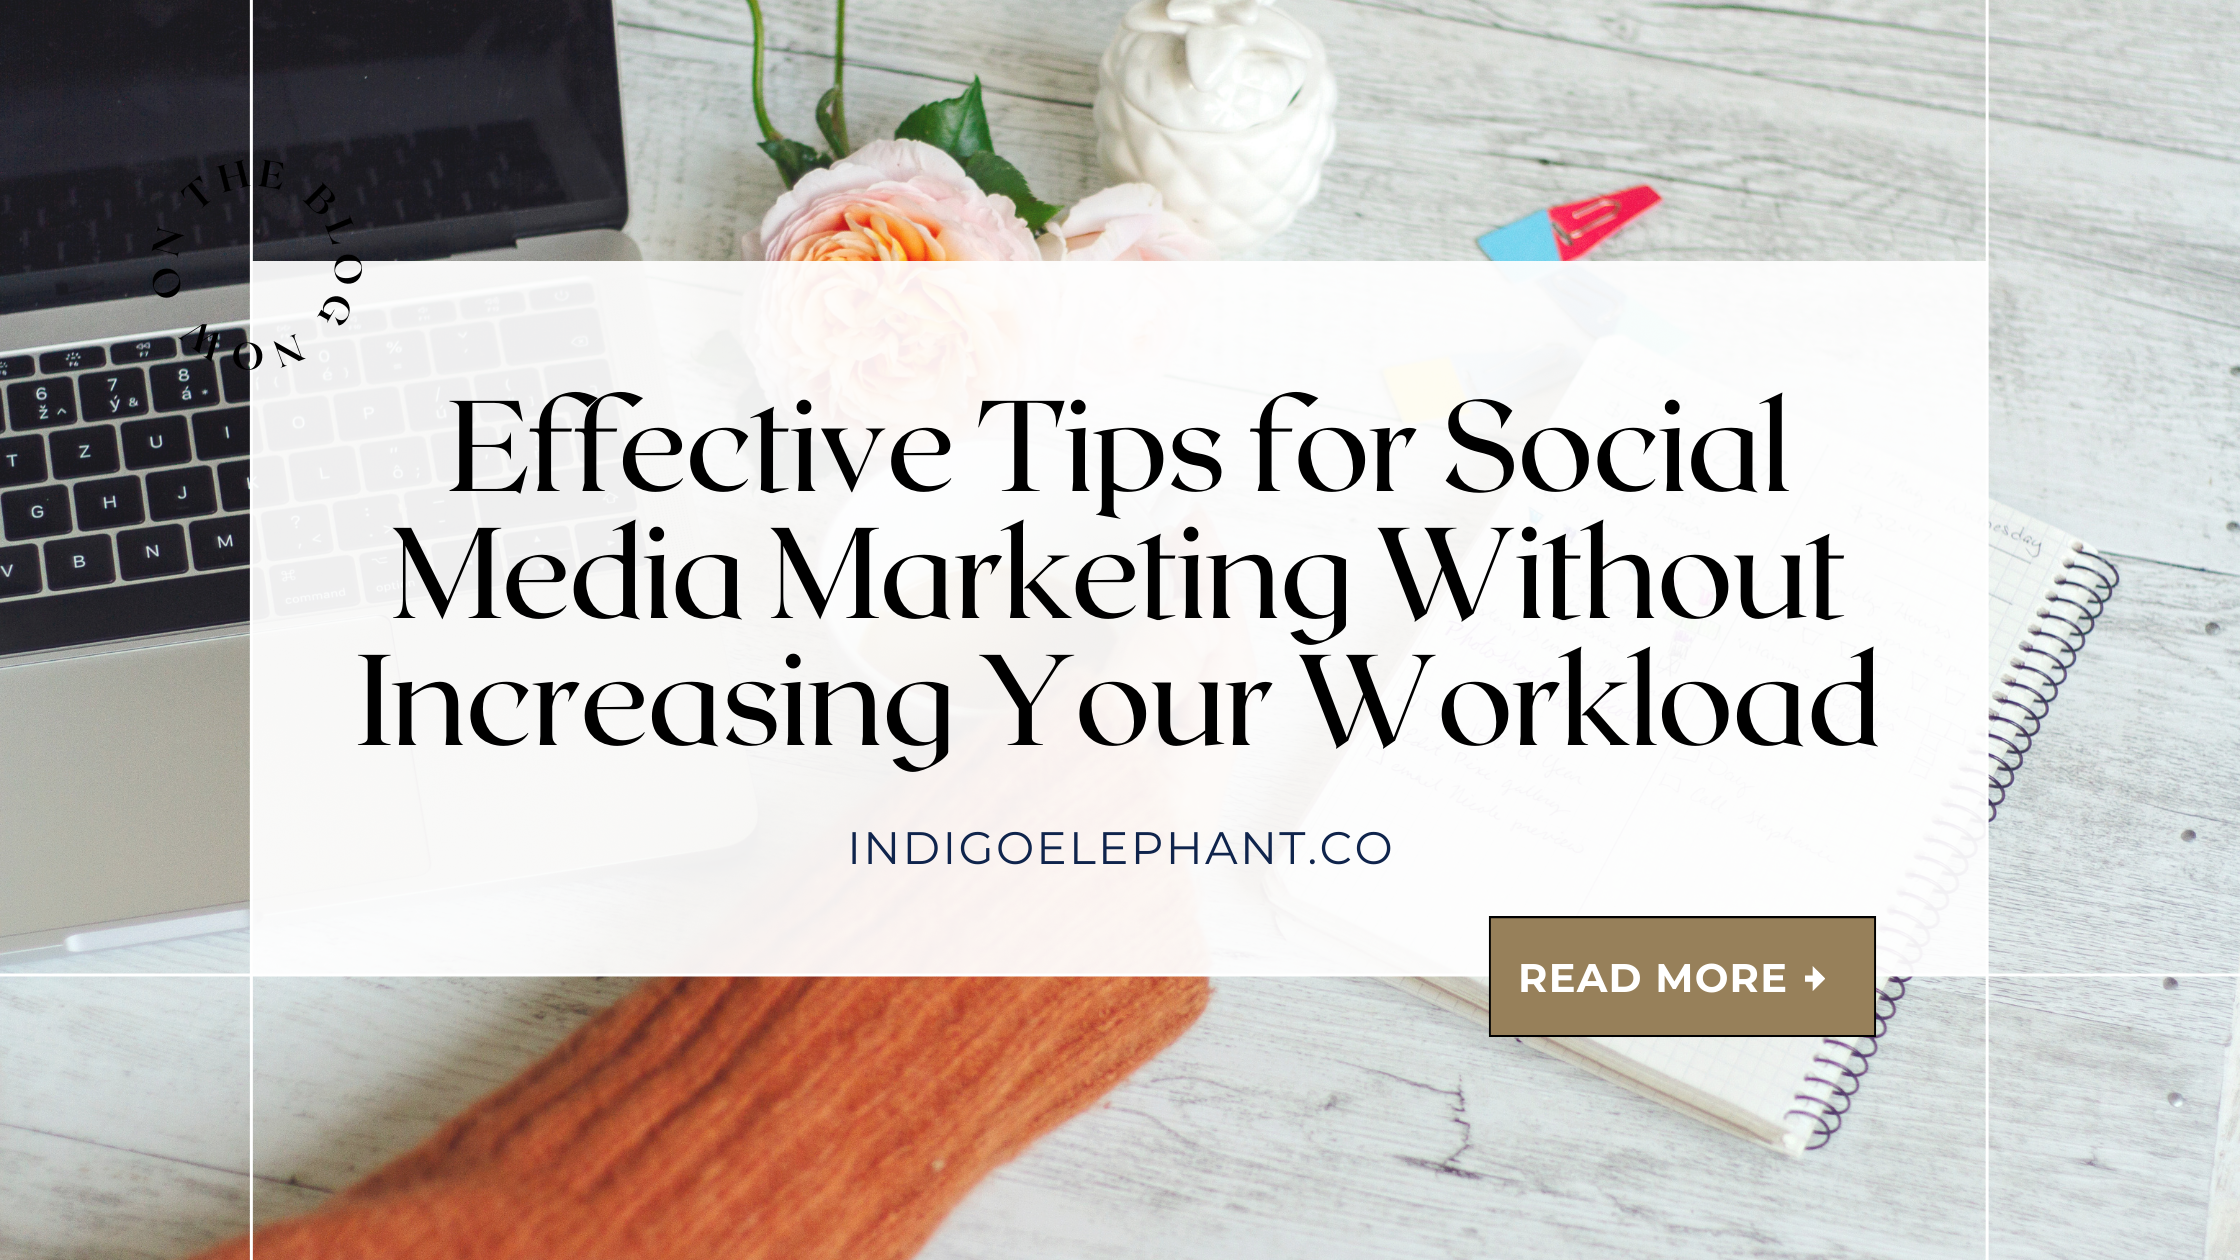 Effective Tips for Social Media Marketing Without Increasing Your Workload